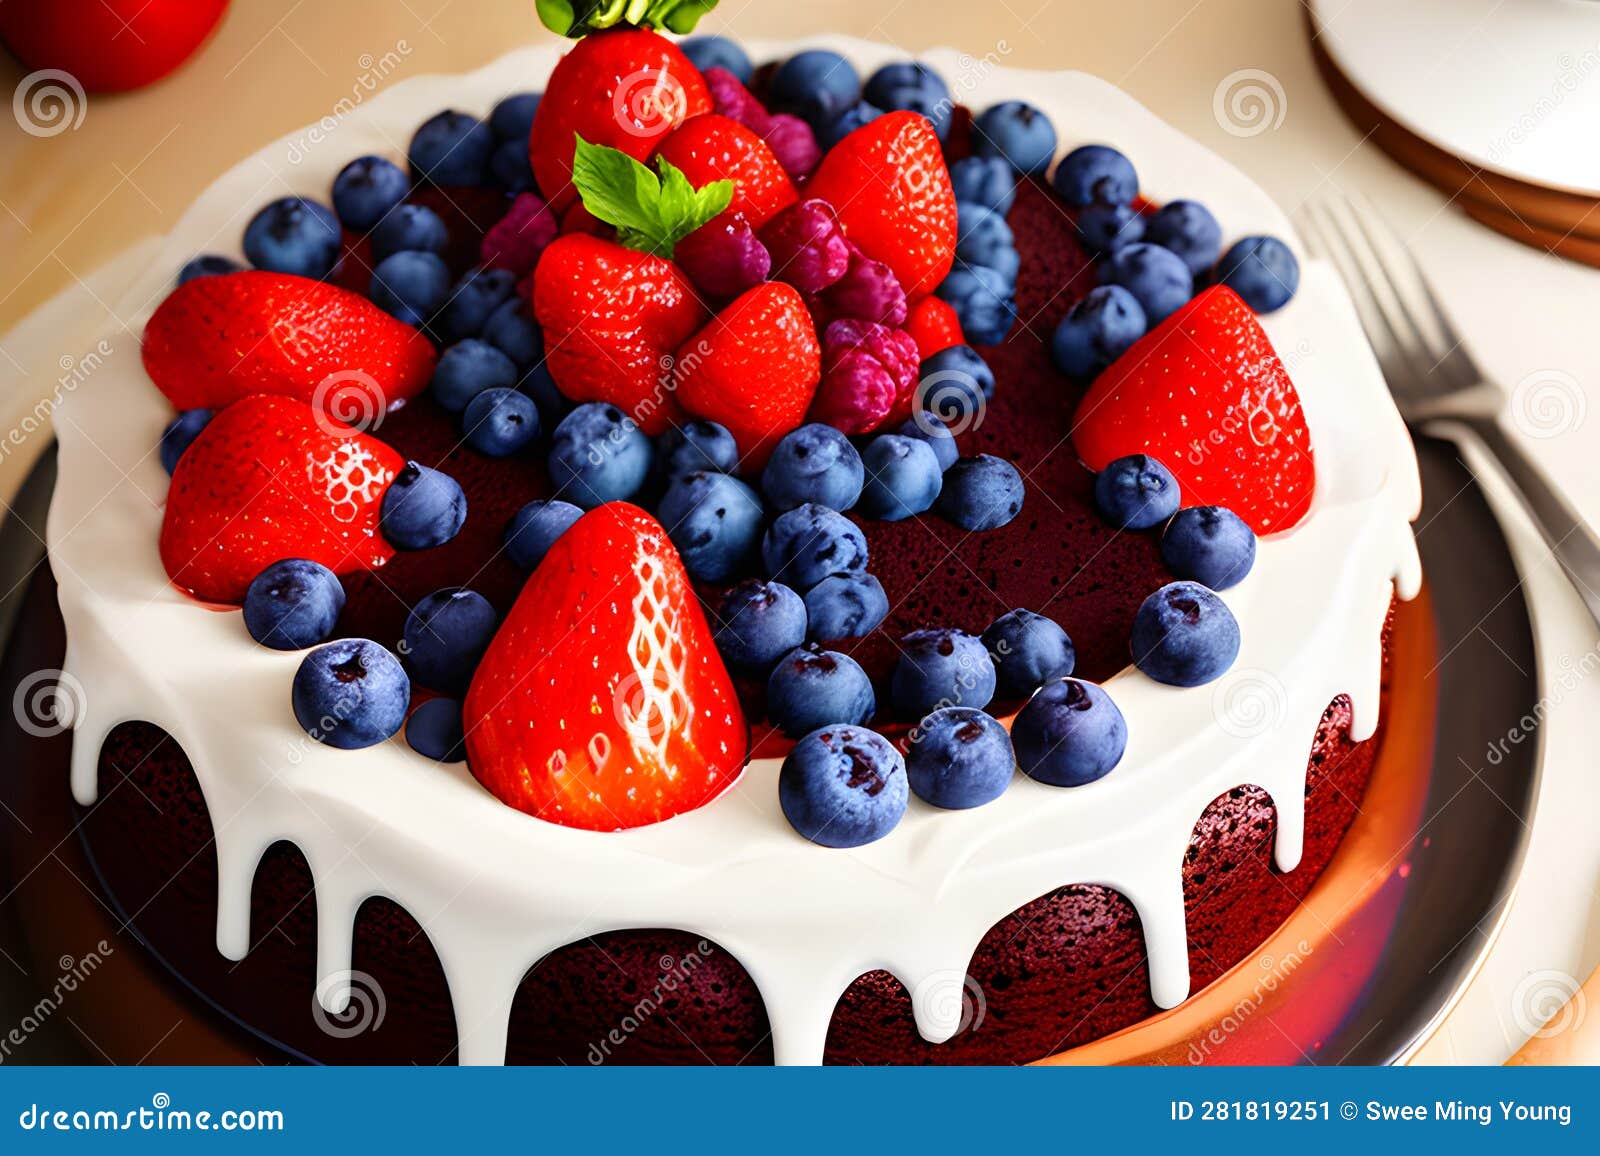 Painterly Image of the Culinary Delicious Cheese Cake with Fruits ...